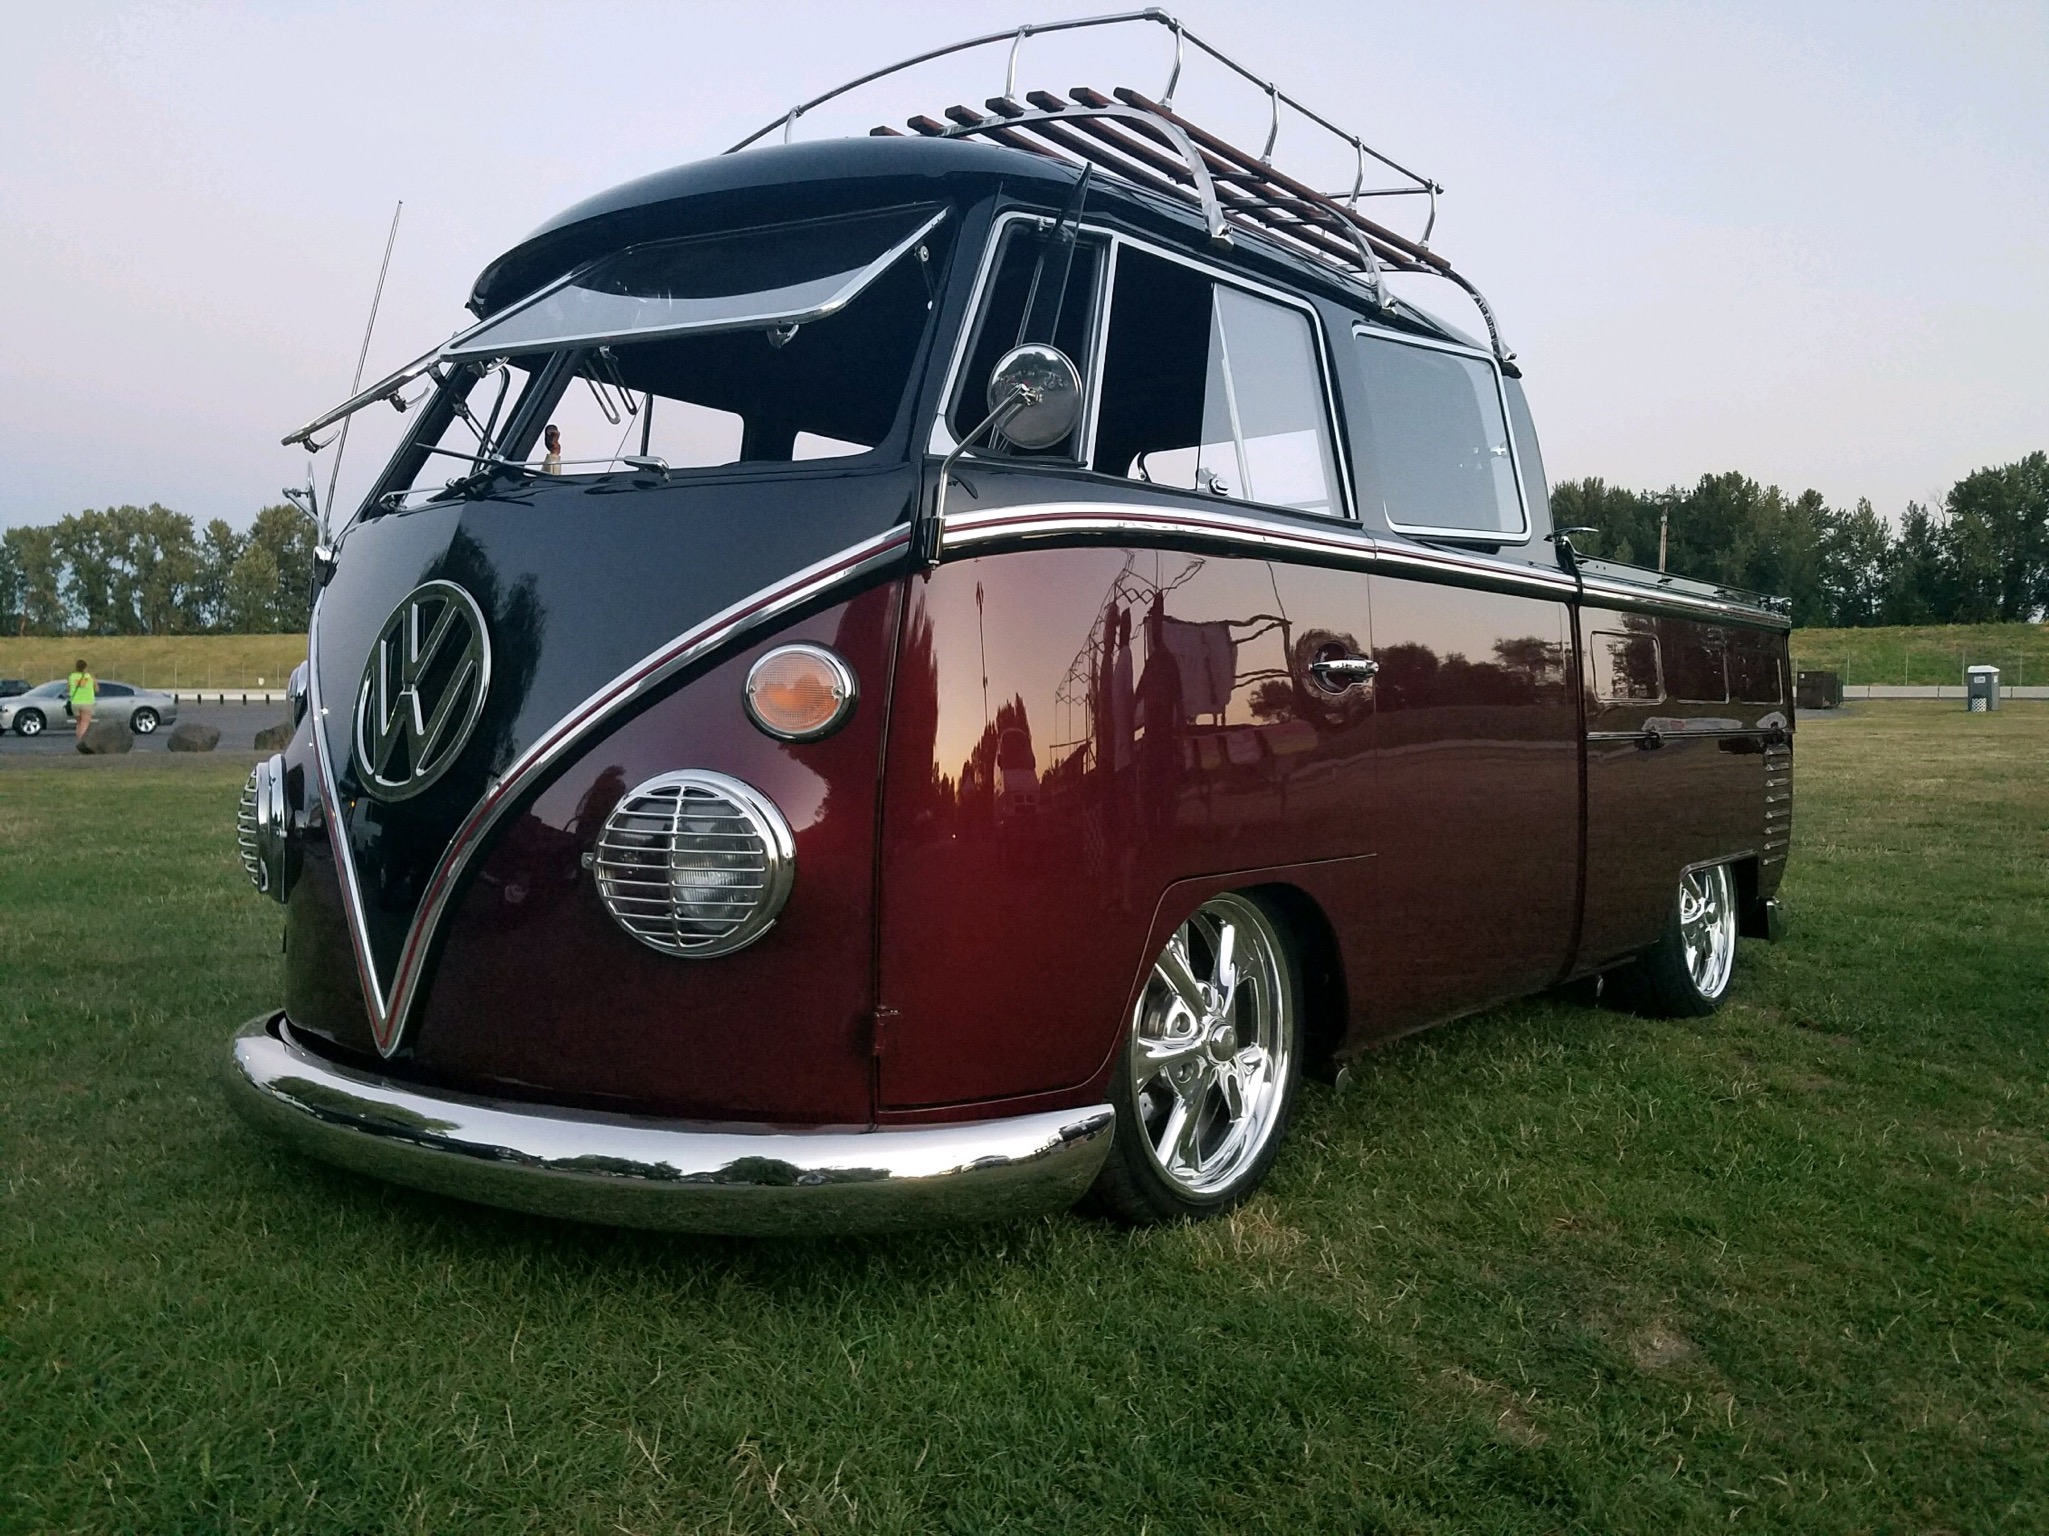 1964 Volkswagen Double Cab Pickup featured in HotVW's